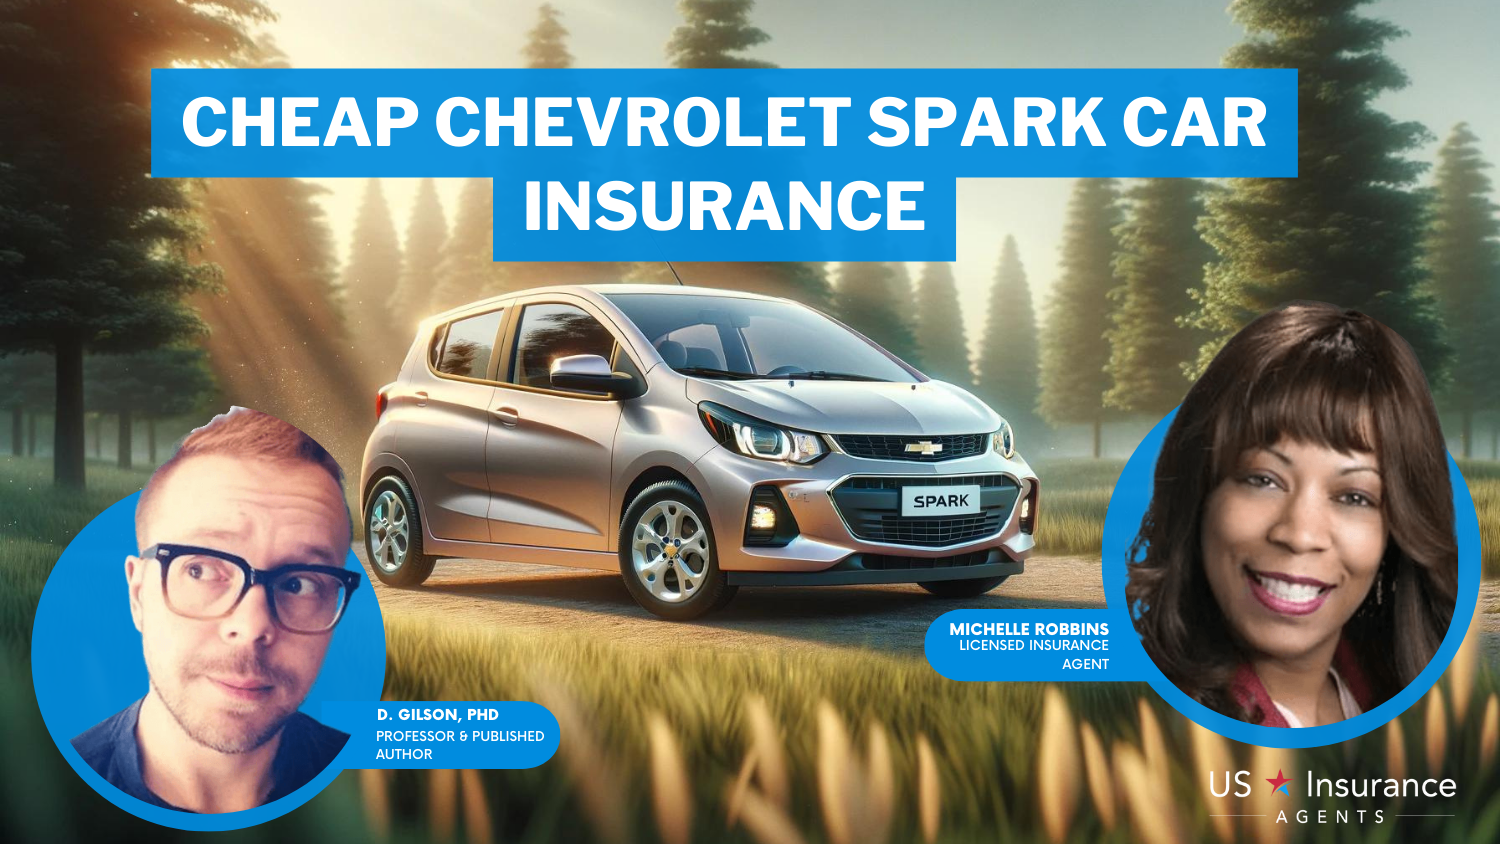 Cheap Chevrolet Spark Car Insurance: Safeco, Auto-Owners, and State Farm